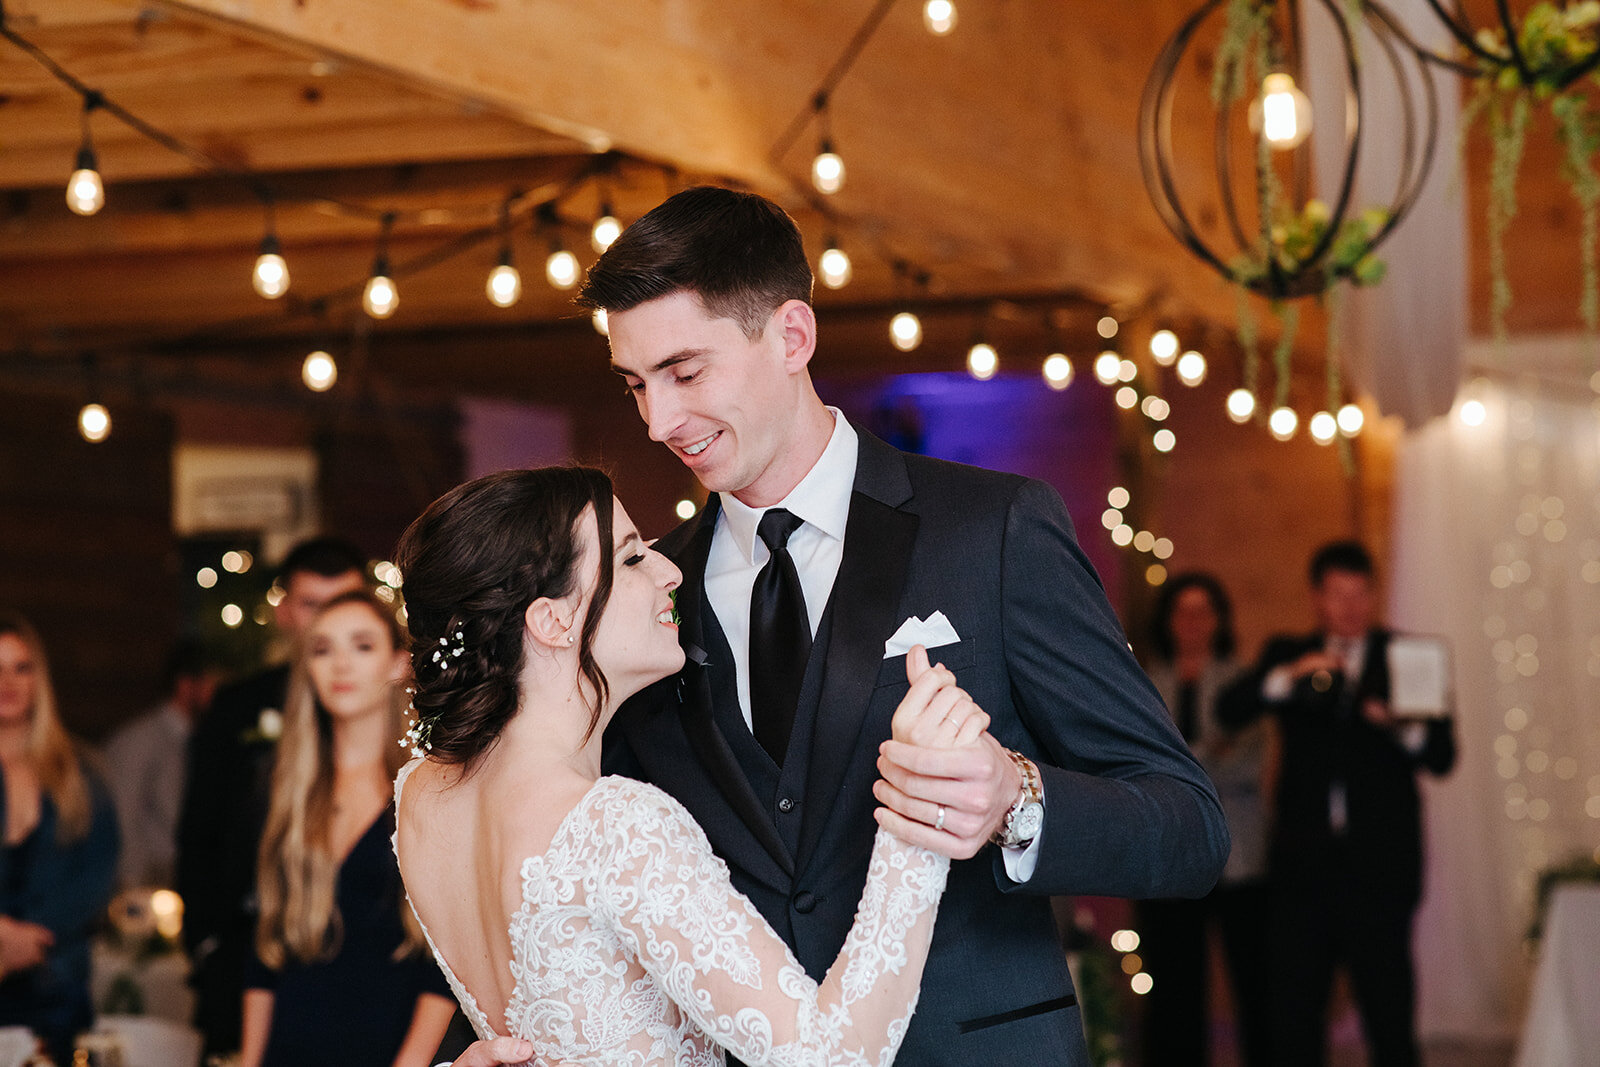 First-Dance-Married-Barn-Reception-with-Lights.jpg